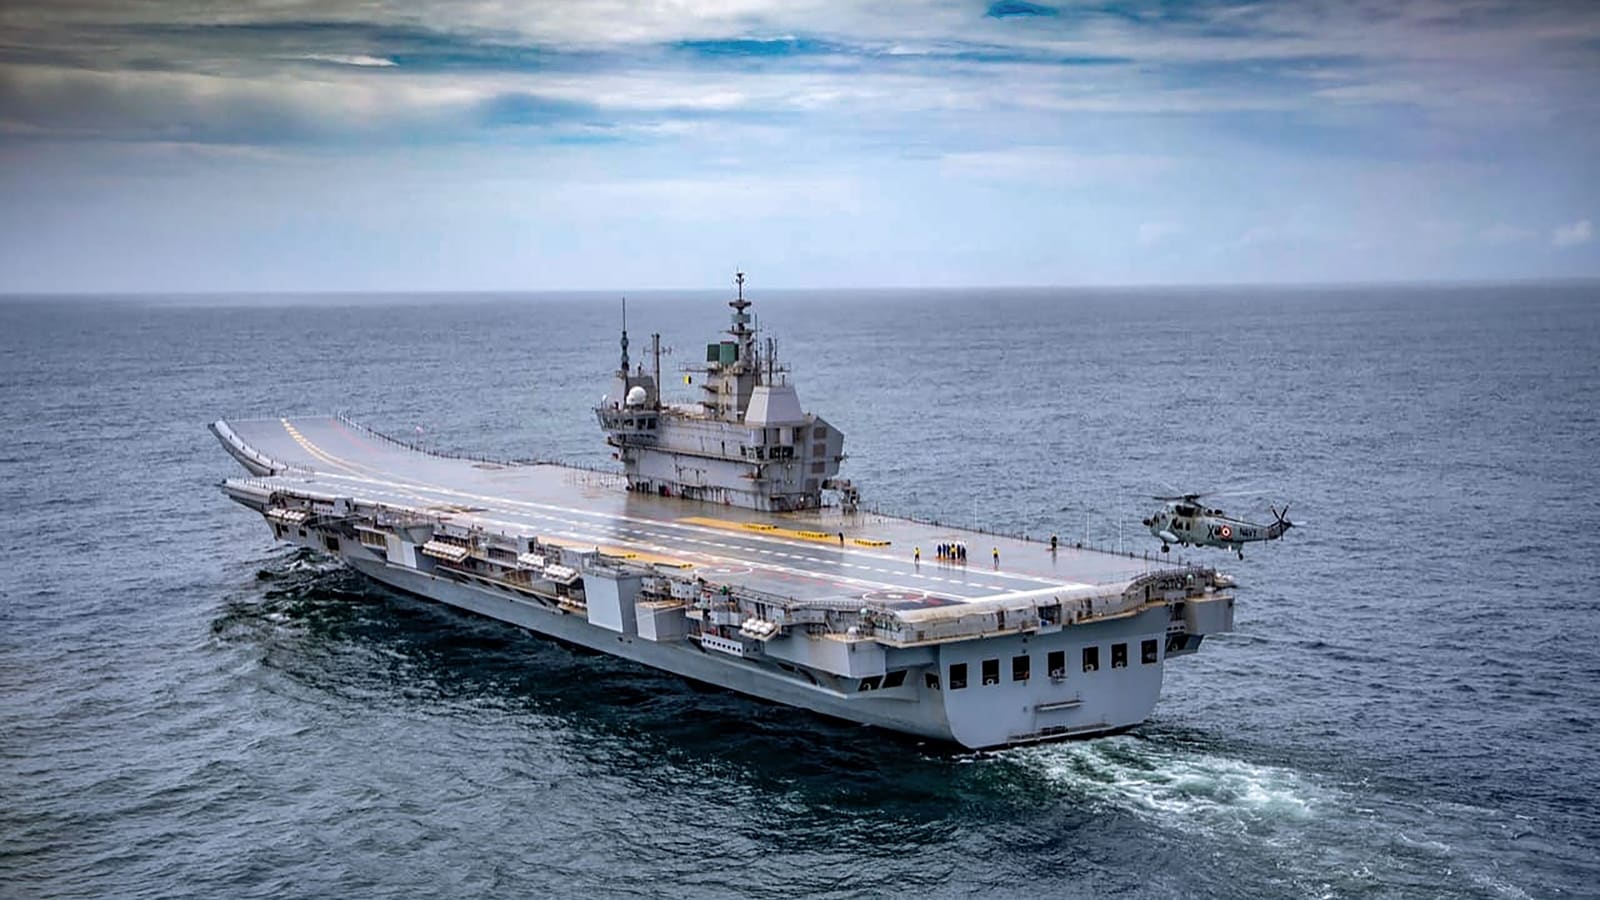 Naval Commanders meeting will be held on INS Vikrant (indigenous aircraft carrier)